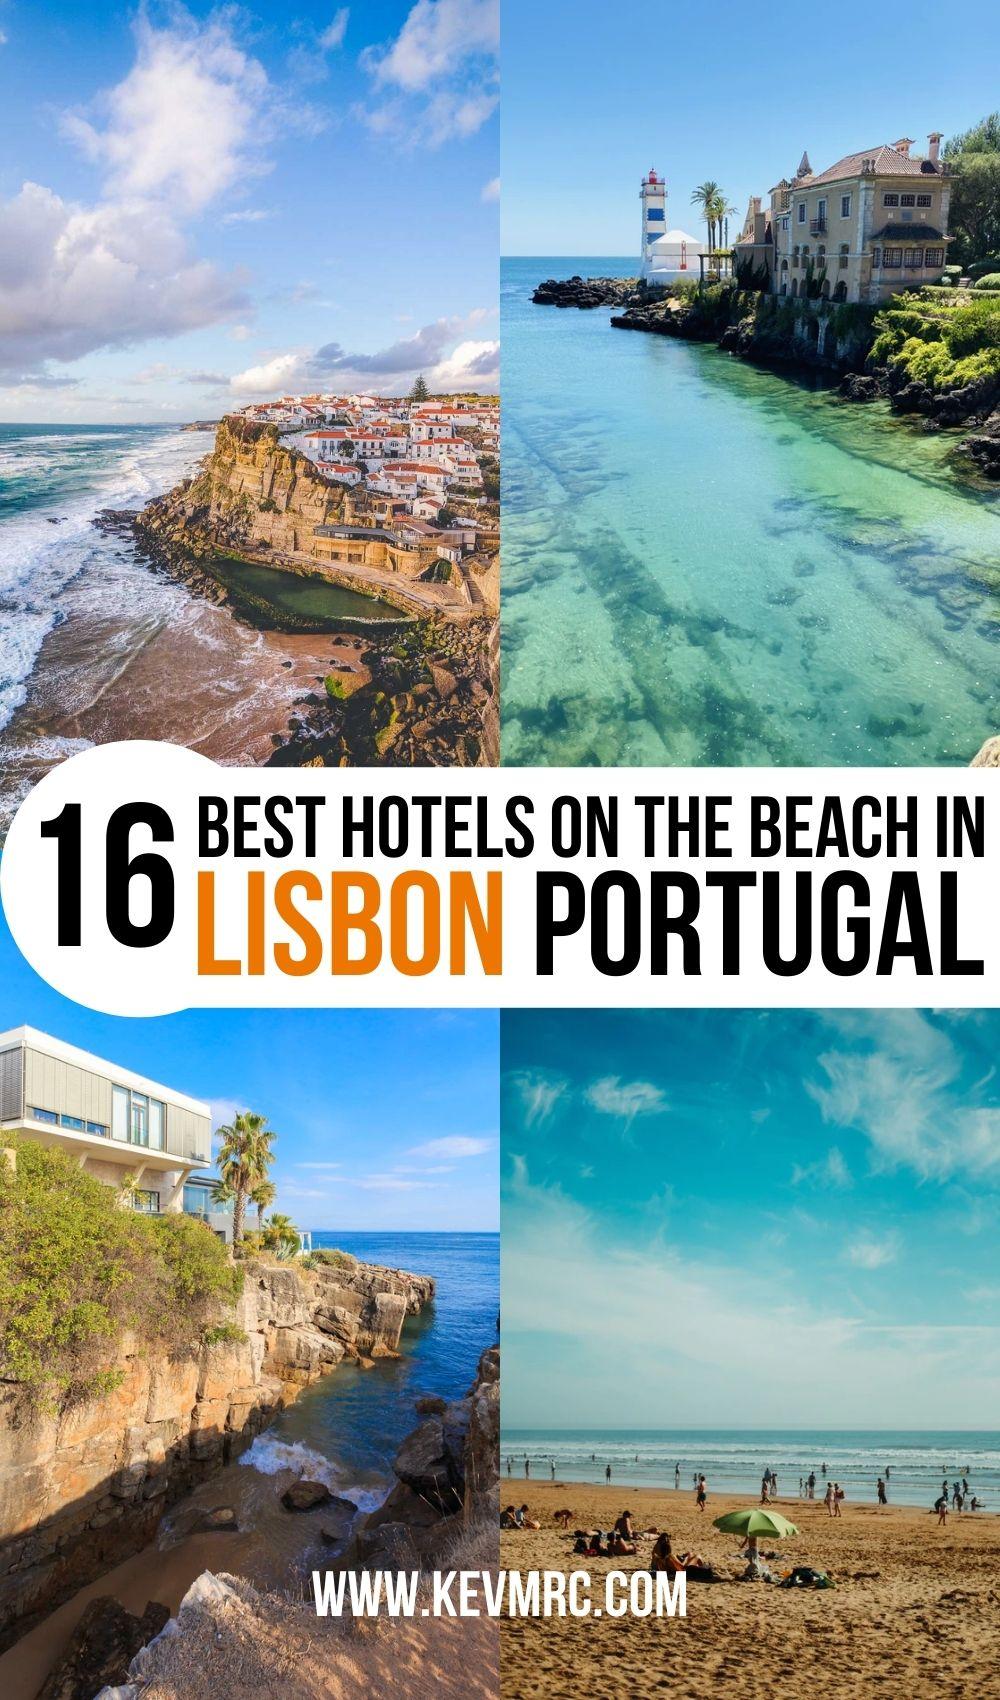 16 Best Hotels on the Beach in Lisbon Portugal. lisbon hotels portugal | best lisbon hotels | portugal travel lisbon | lisbon portugal beach | lisbon portugal beach vacations | lisbon portugal beach destinations